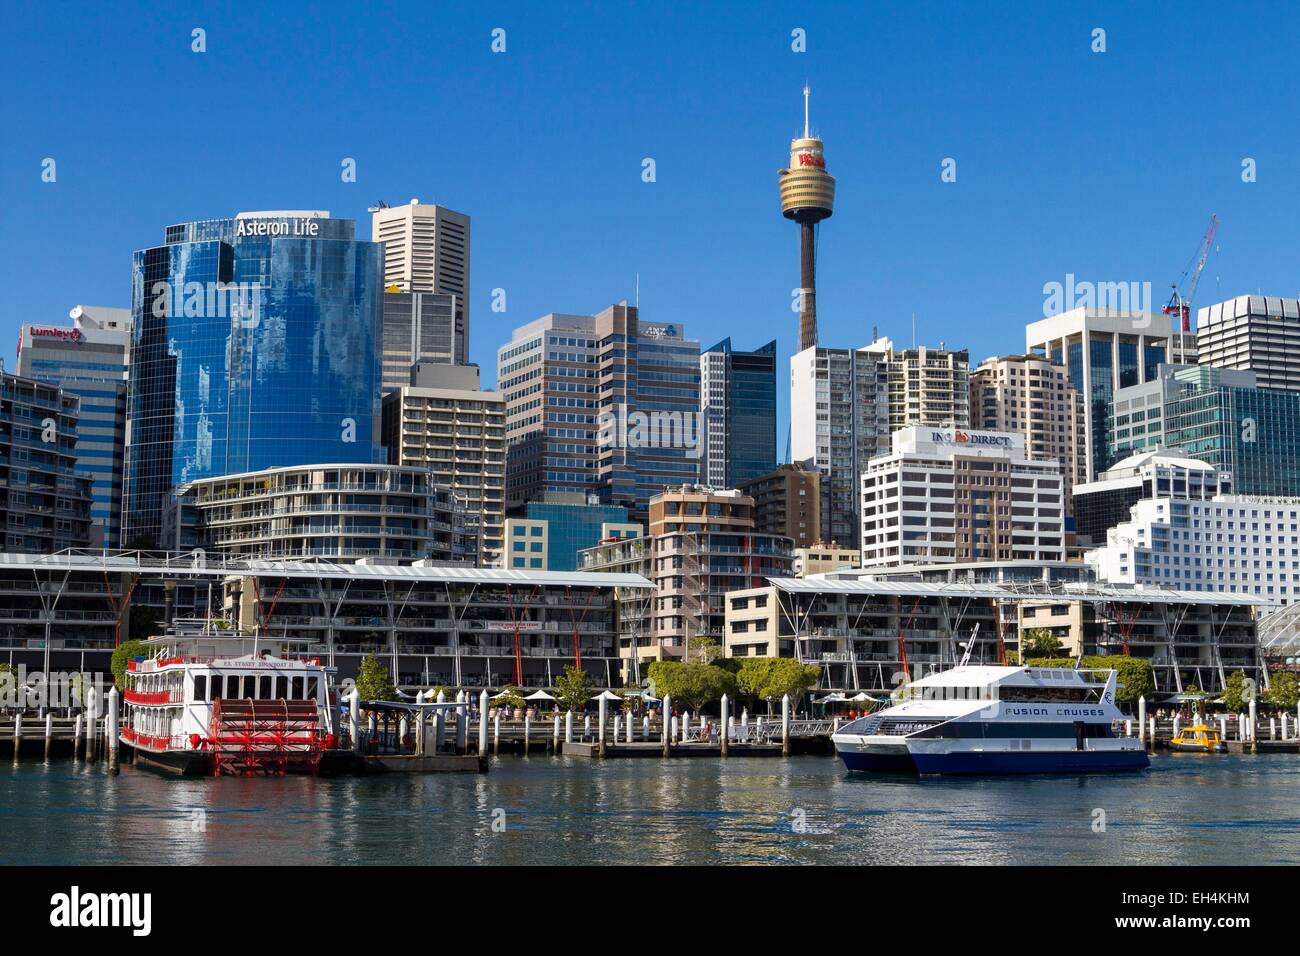 Australia, New South Wales, Sydney, Darling Harbour district Stock Photo